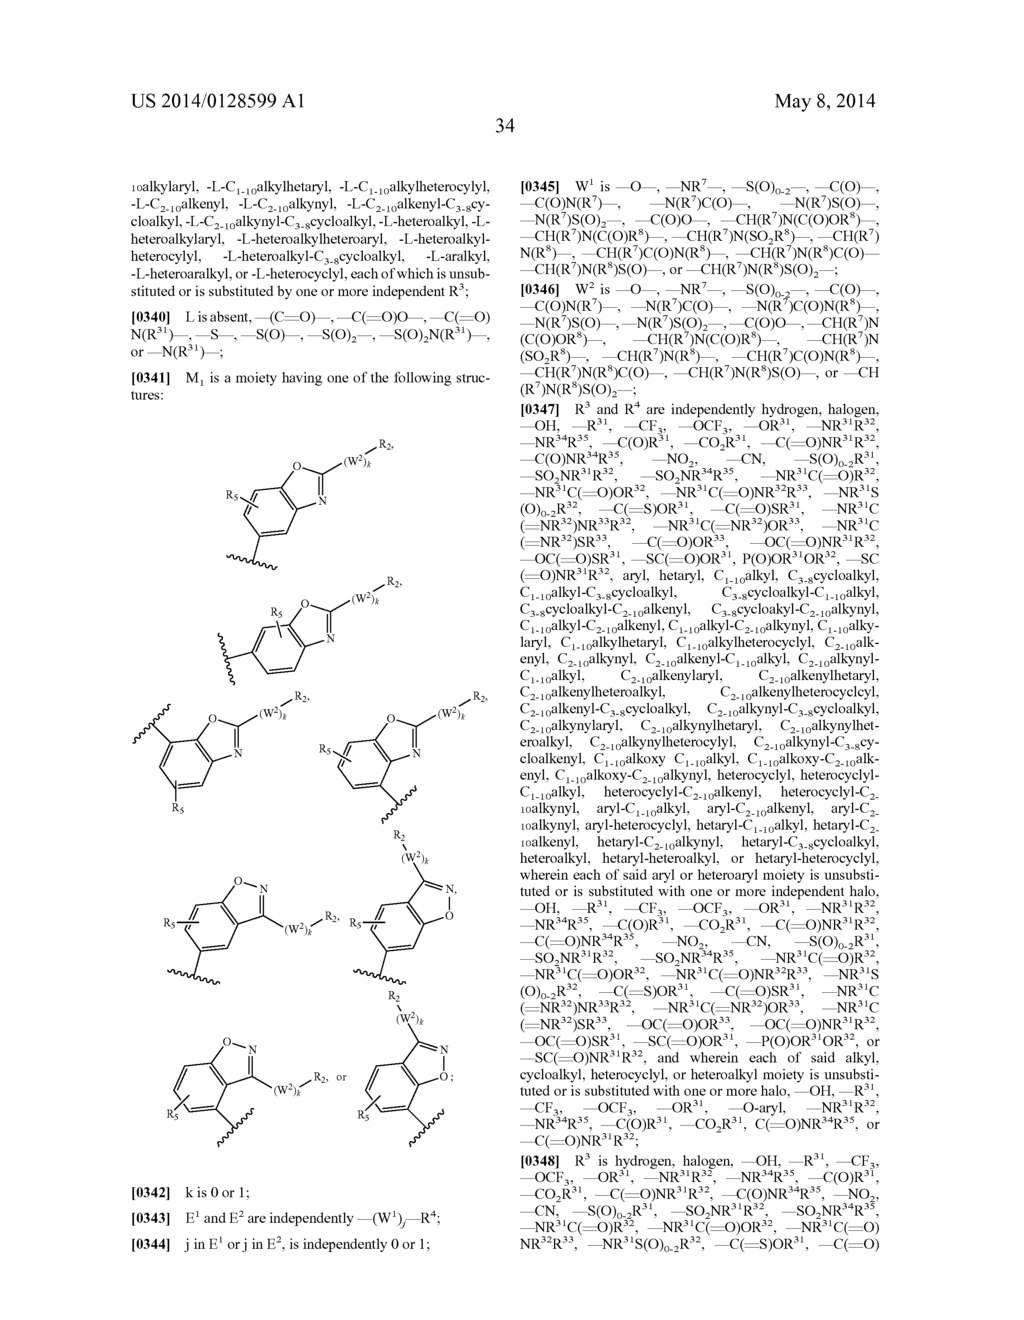 BENZOXAZOLE KINASE INHIBITORS AND METHODS OF USE - diagram, schematic, and image 55